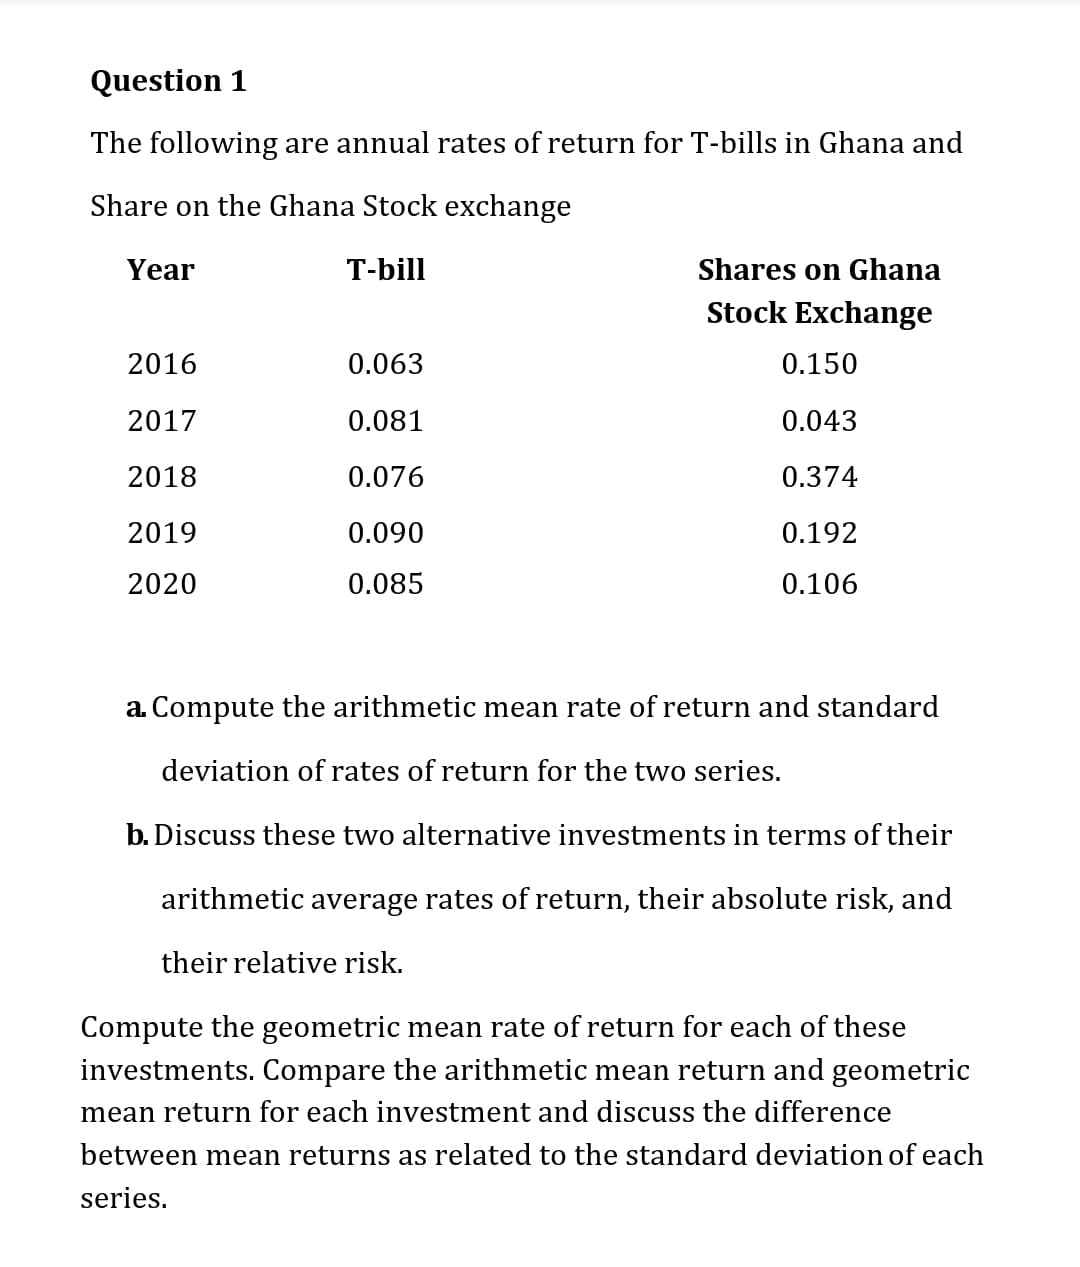 Question 1
The following are annual rates of return for T-bills in Ghana and
Share on the Ghana Stock exchange
Year
T-bill
Shares on Ghana
Stock Exchange
2016
0.063
0.150
2017
0.081
0.043
2018
0.076
0.374
2019
0.090
0.192
2020
0.085
0.106
a. Compute the arithmetic mean rate of return and standard
deviation of rates of return for the two series.
b. Discuss these two alternative investments in terms of their
arithmetic average rates of return, their absolute risk, and
their relative risk.
Compute the geometric mean rate of return for each of these
investments. Compare the arithmetic mean return and geometric
mean return for each investment and discuss the difference
between mean returns as related to the standard deviation of each
series.
